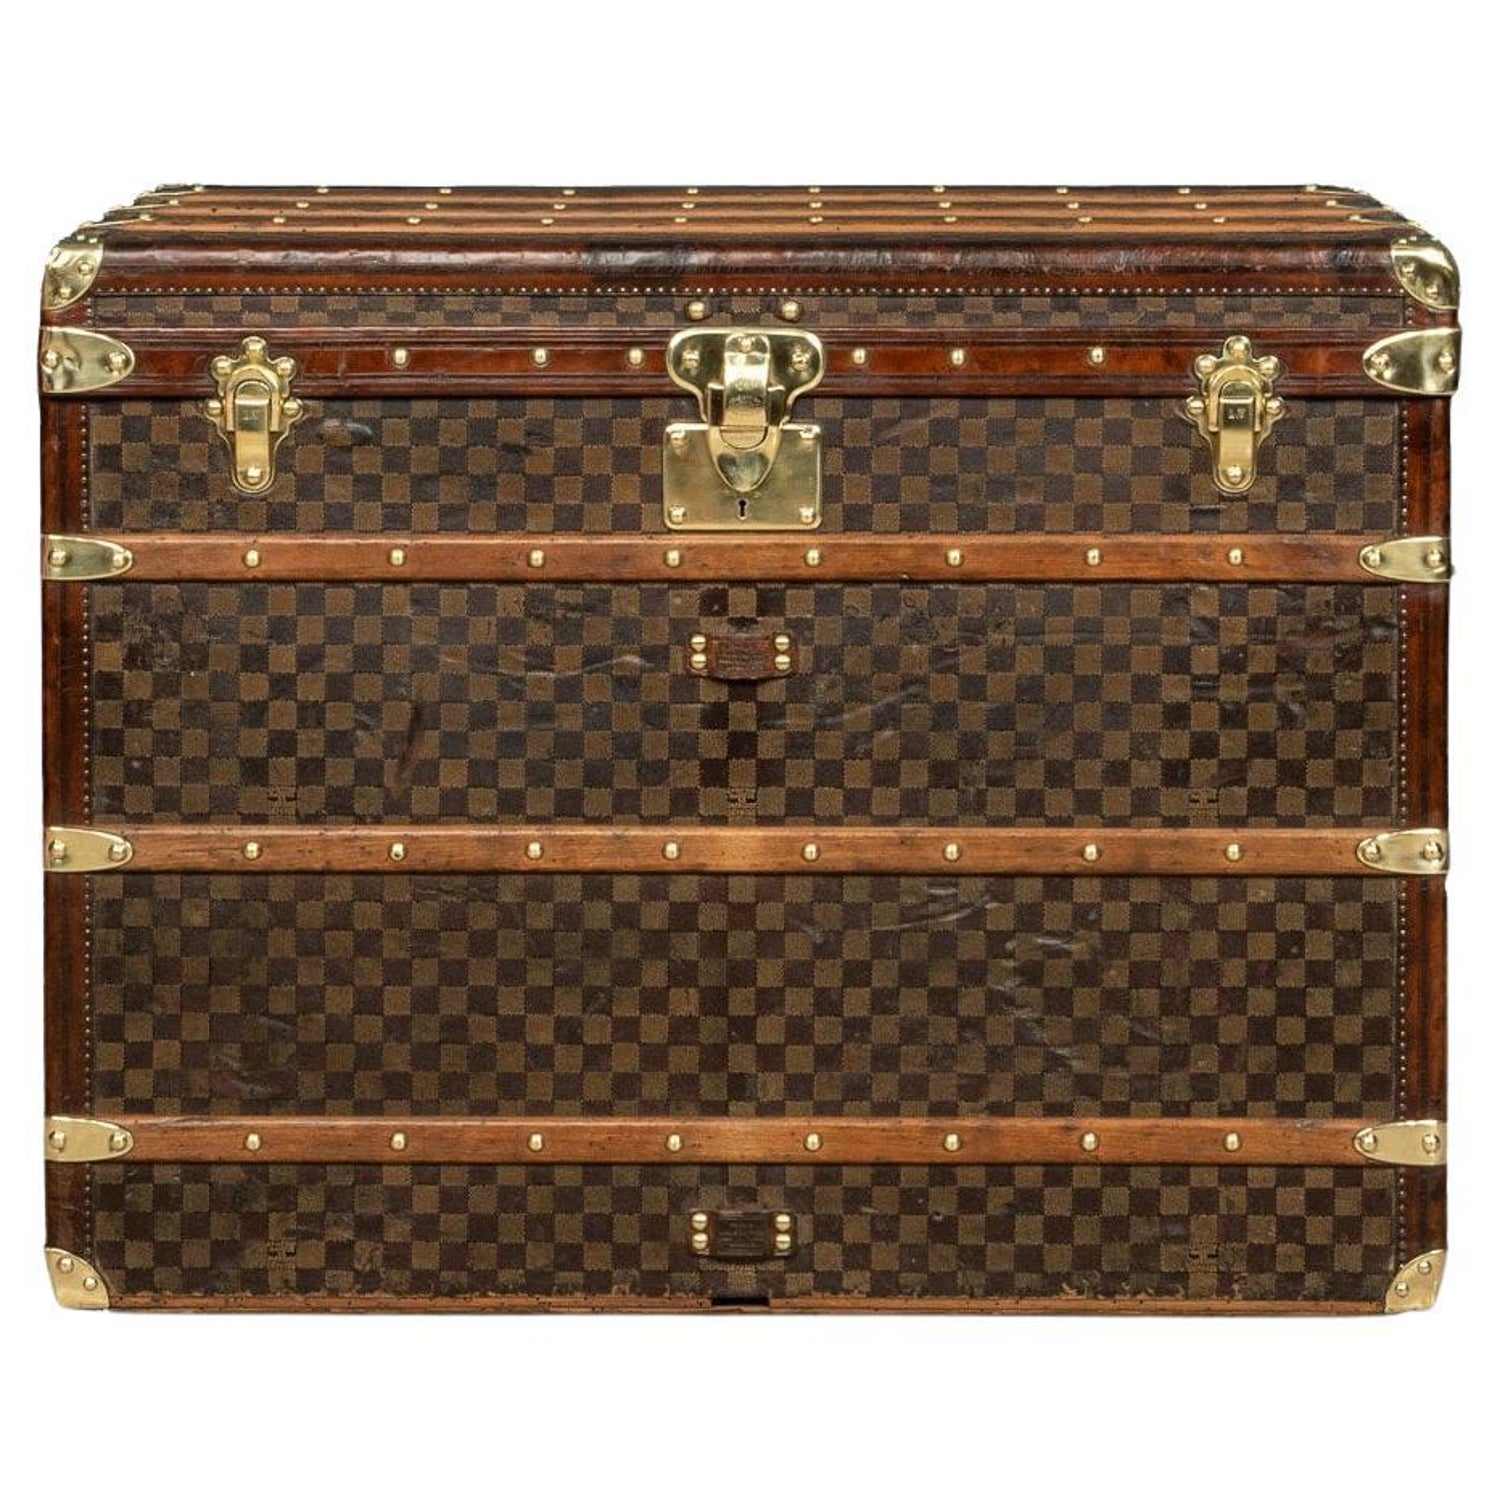 Contemporary White French Bulldog Print on Louis Vuitton Trunk by